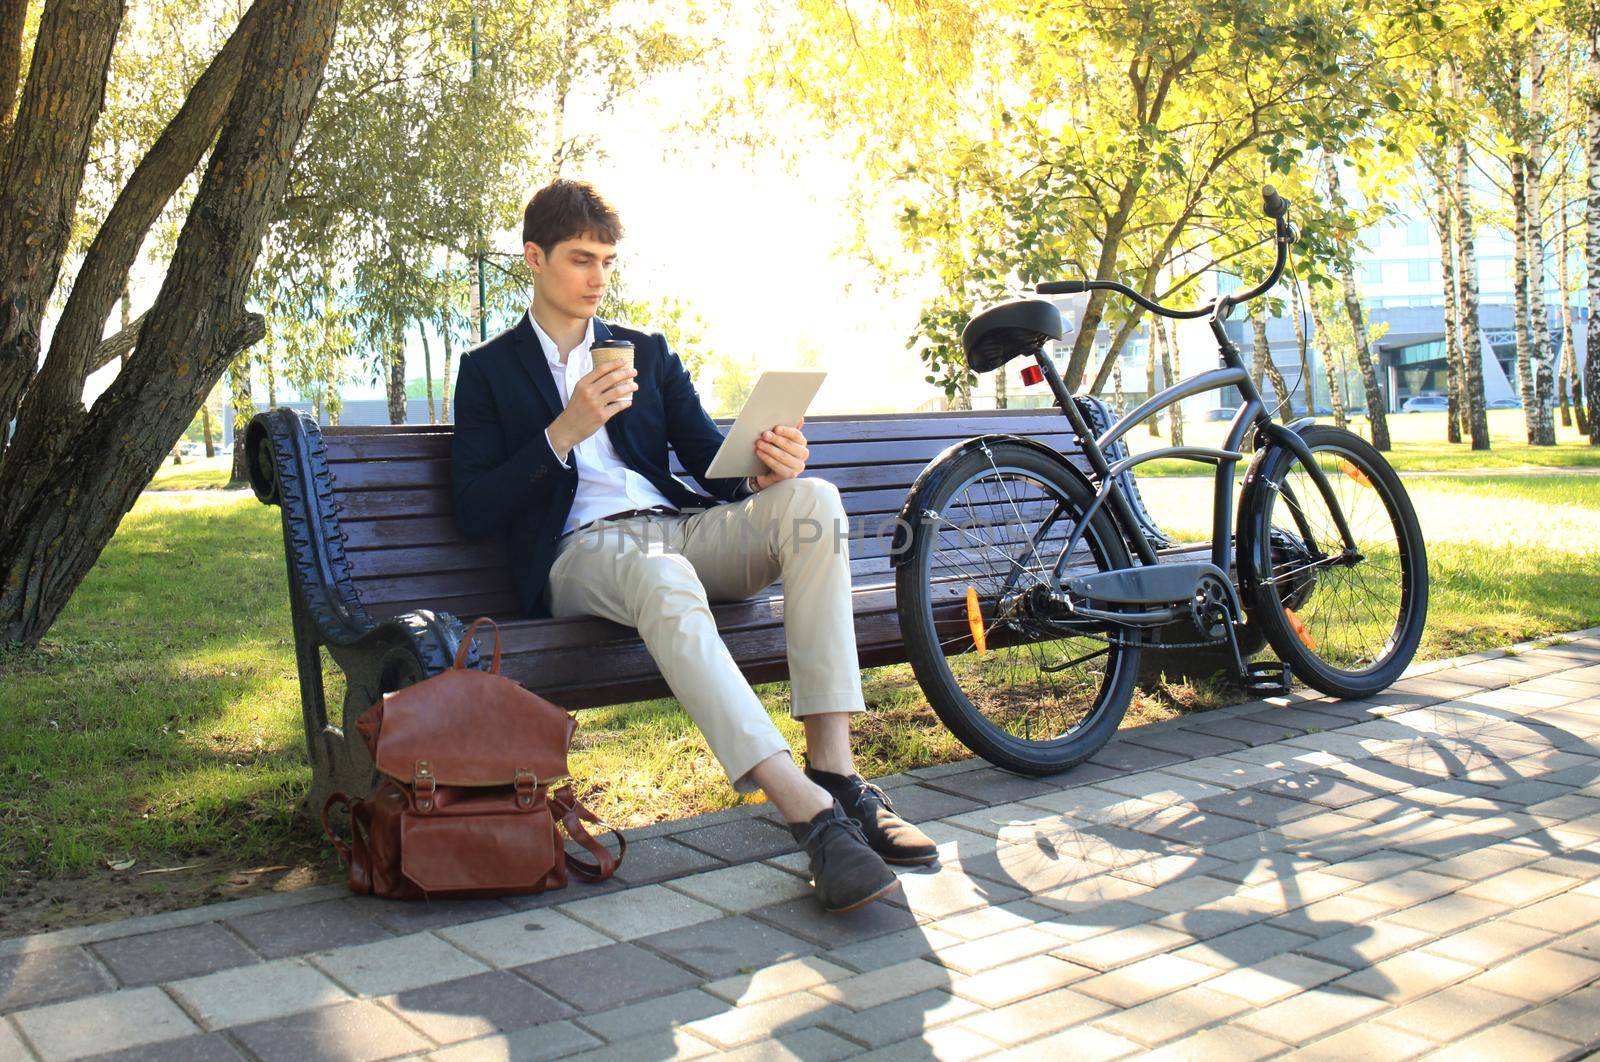 Businessman on a coffee break. He is sitting on a bench and working at touchpad, next to bike.